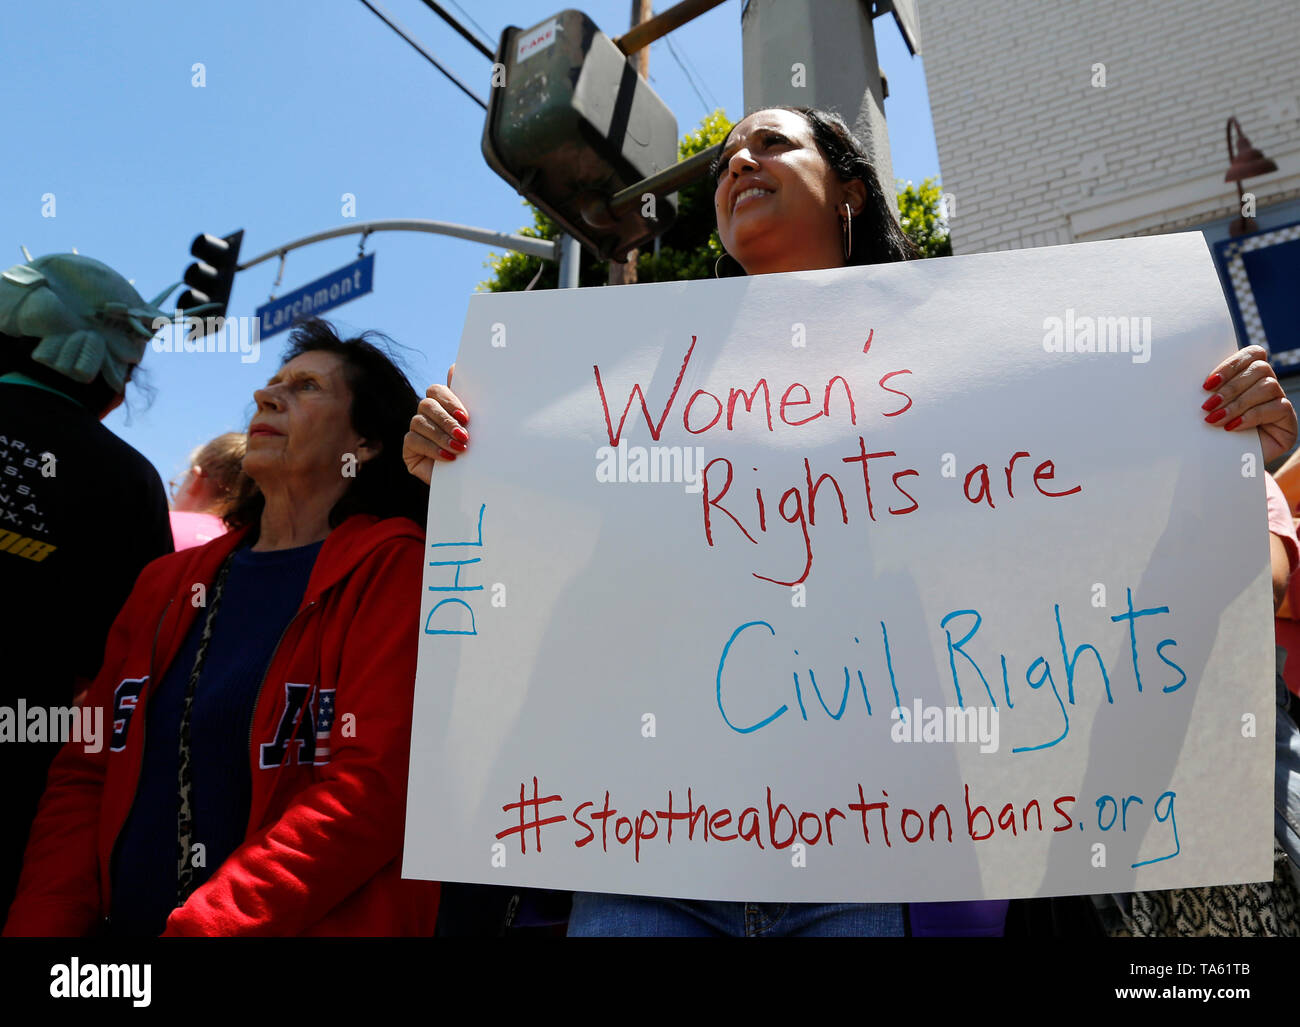 Los Angeles, USA. 21st May, 2019. People attend a rally in Los Angeles, the United States, on May 21, 2019. Dozens of rallies were held Tuesday in southern California's major cities to denounce the growing number of states passing restrictive abortion laws and demand women's rights in the contentious abortion issue. Credit: Li Ying/Xinhua/Alamy Live News Stock Photo